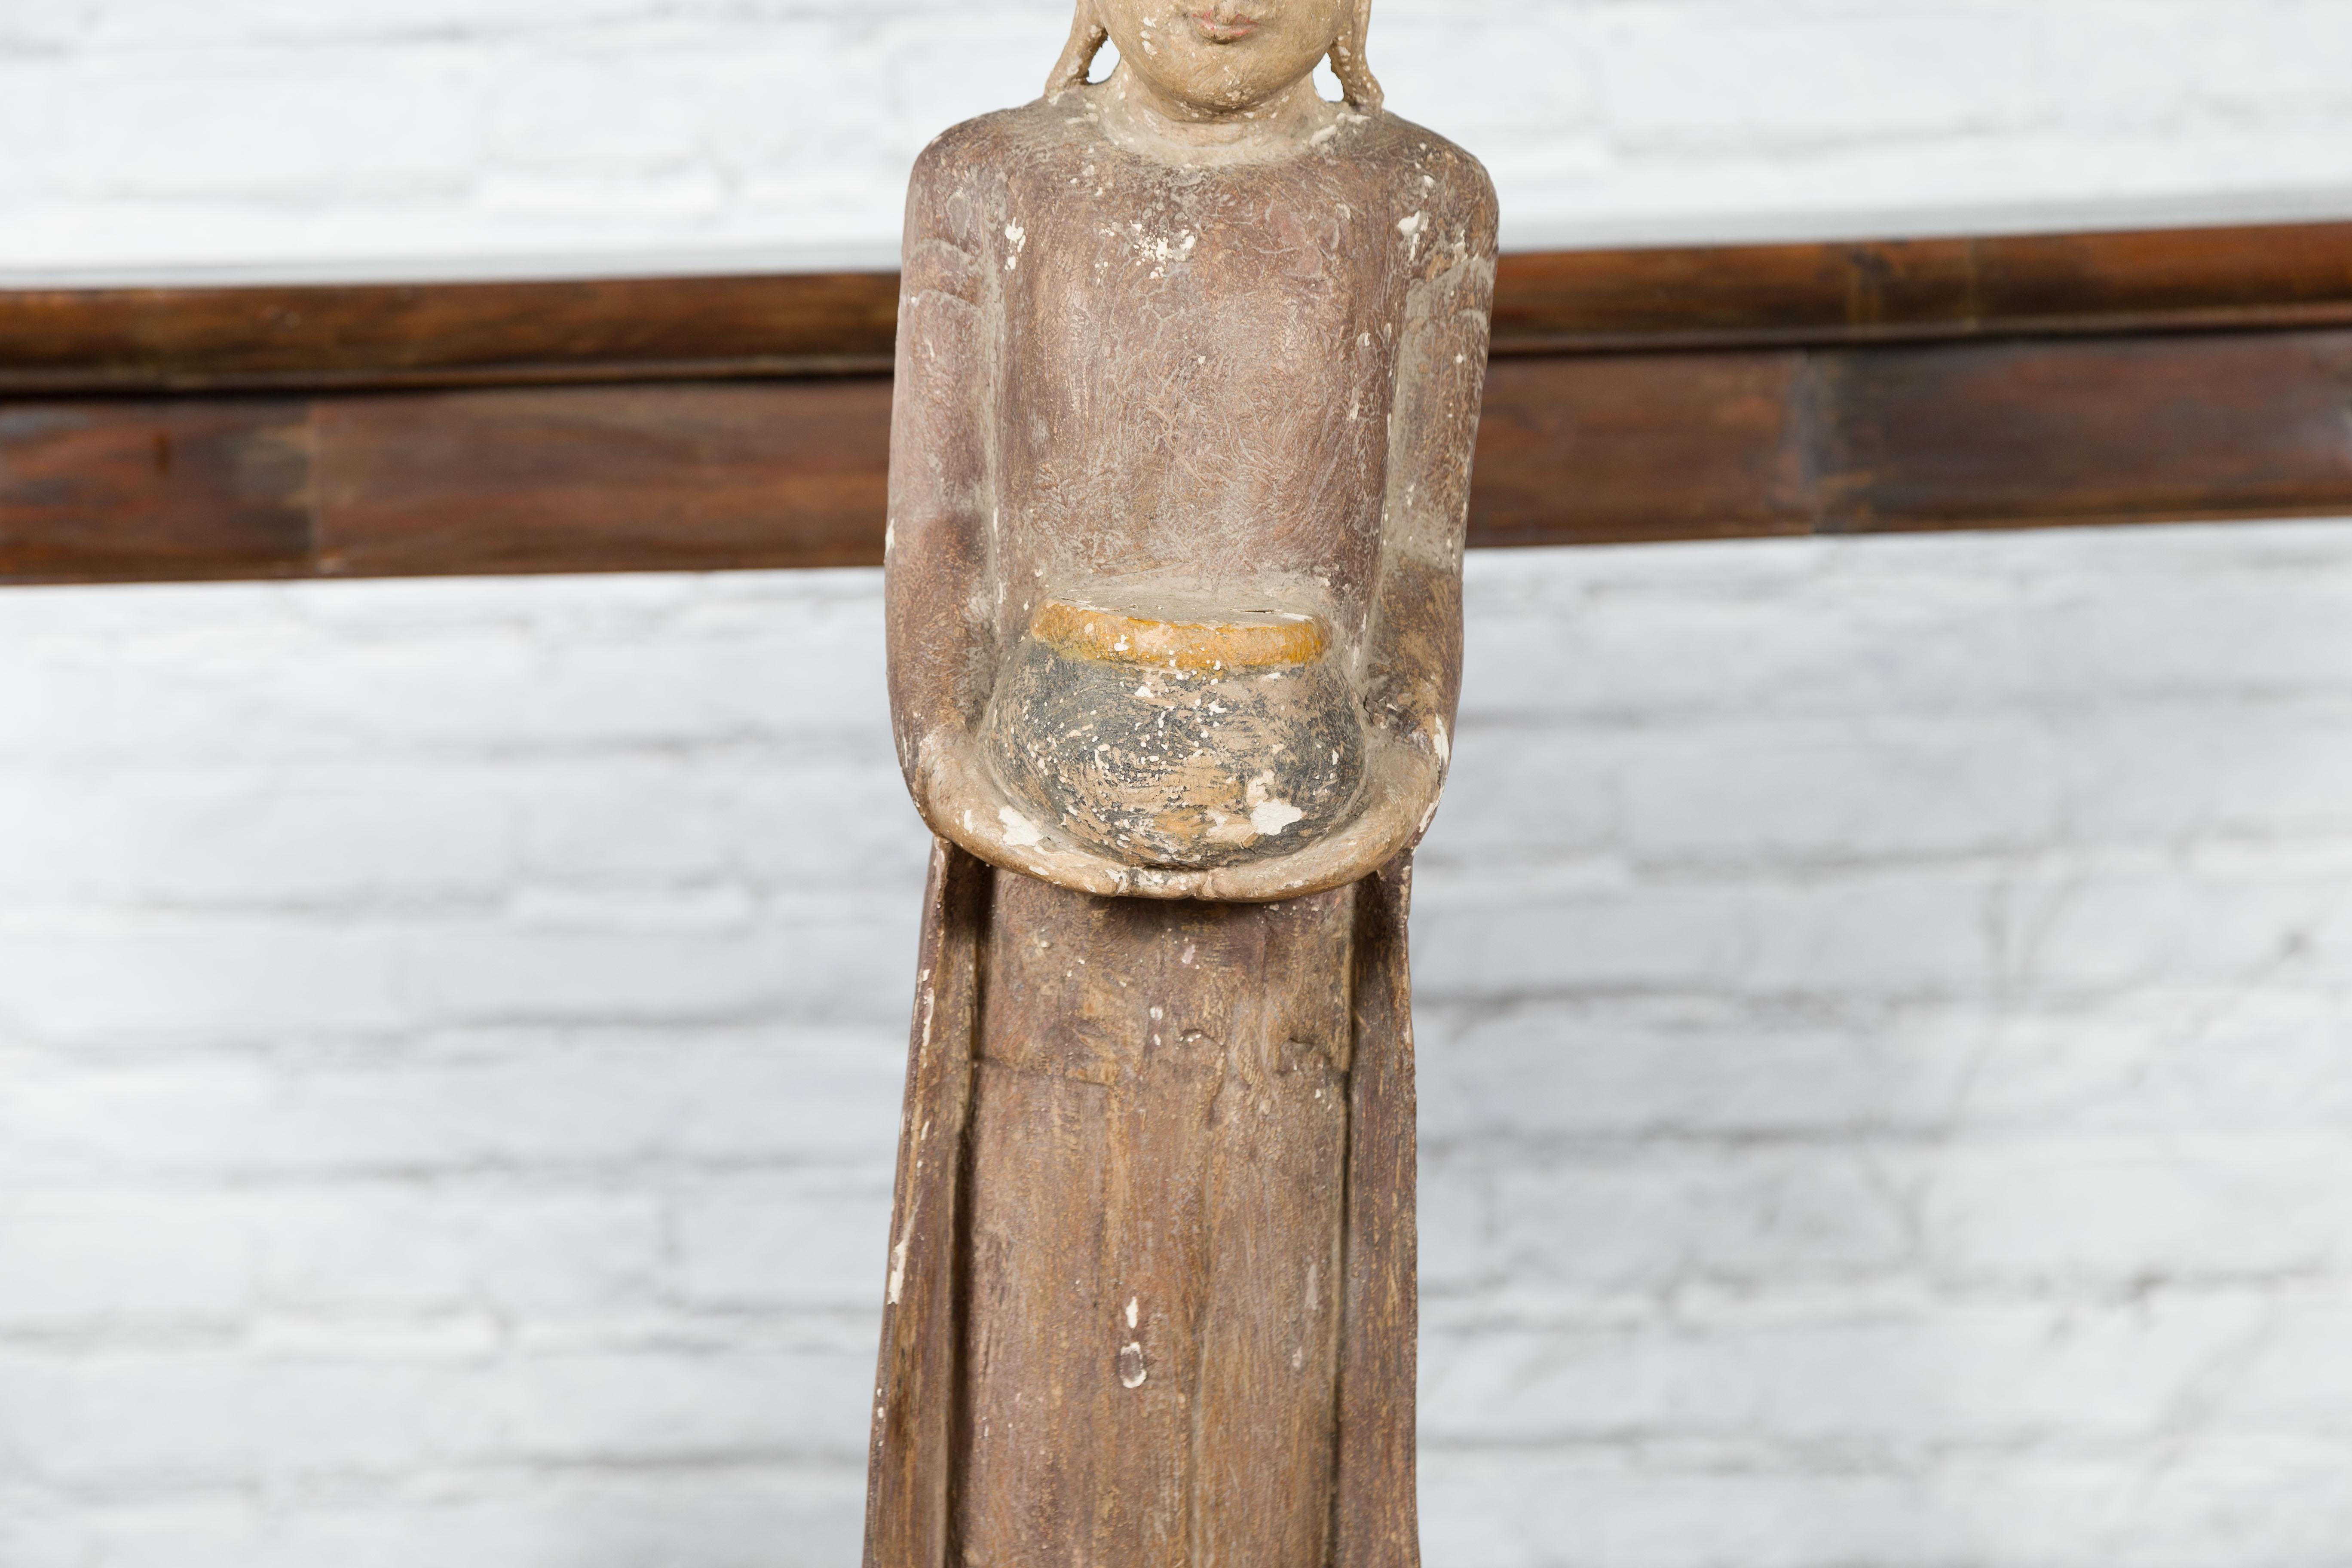 20th Century Thai Hand-Carved Standing Buddhist Monk Sculpture on Base with Offering Bowl